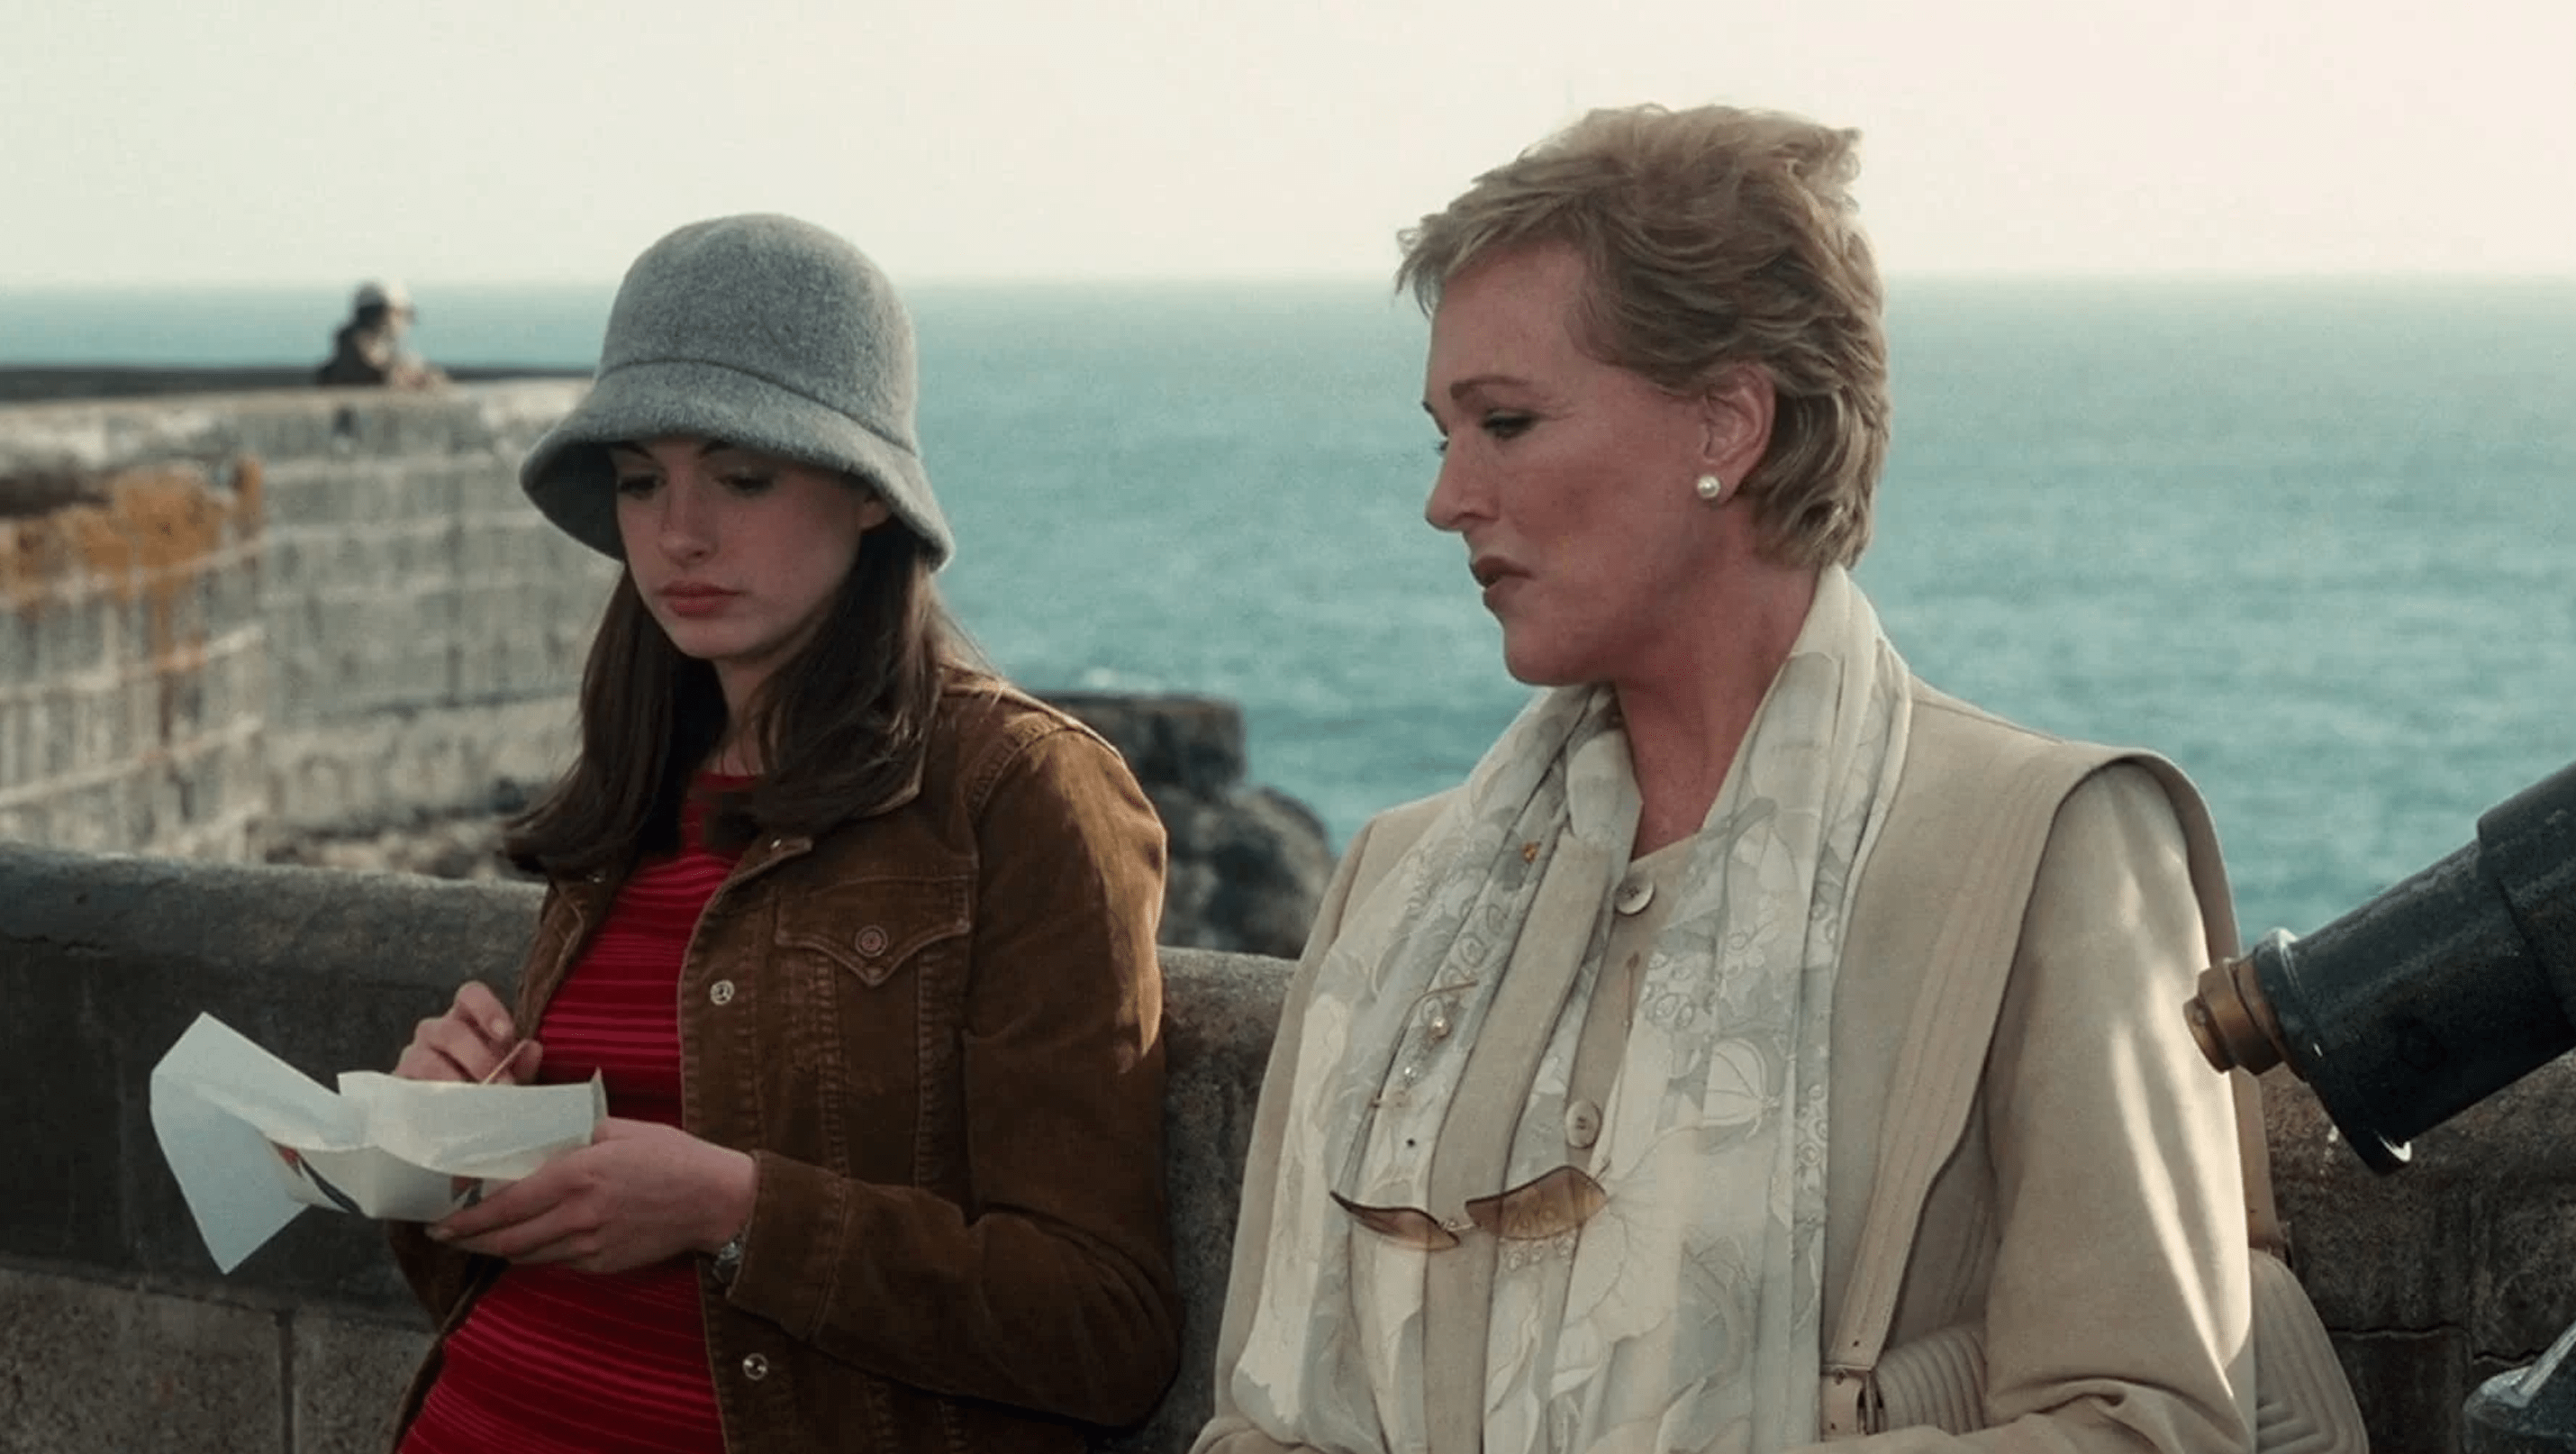 Anne Hathaway and Julie Andrews talk outside The Cliff House.